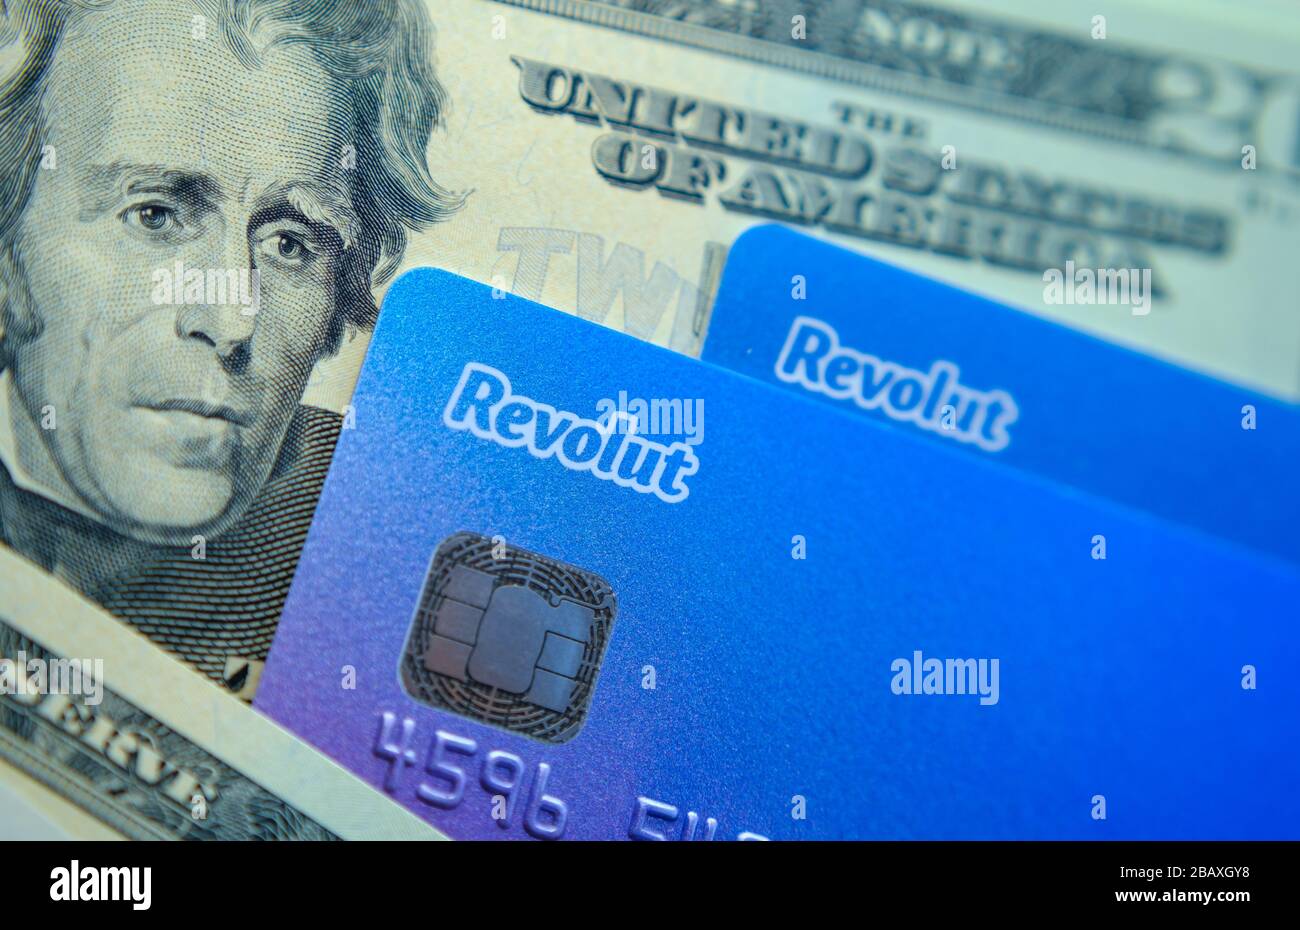 Stone / United Kingdom - March 29 2020: Revolut cards placed on top of dollar notes. Concept photo for revolut bank expansion to American market. Stock Photo